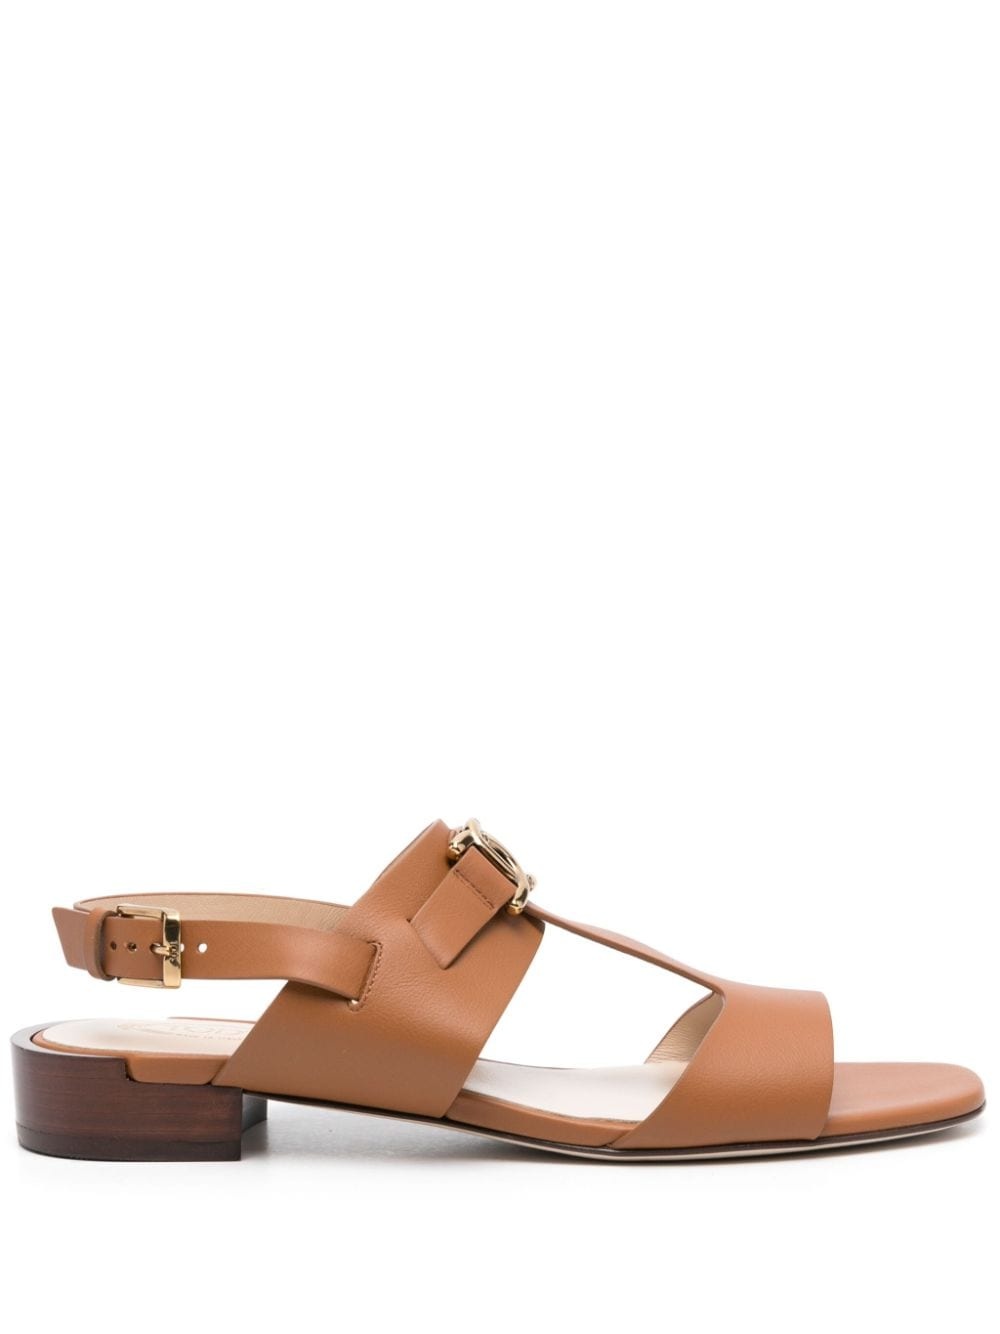 Kate leather sandals - 1